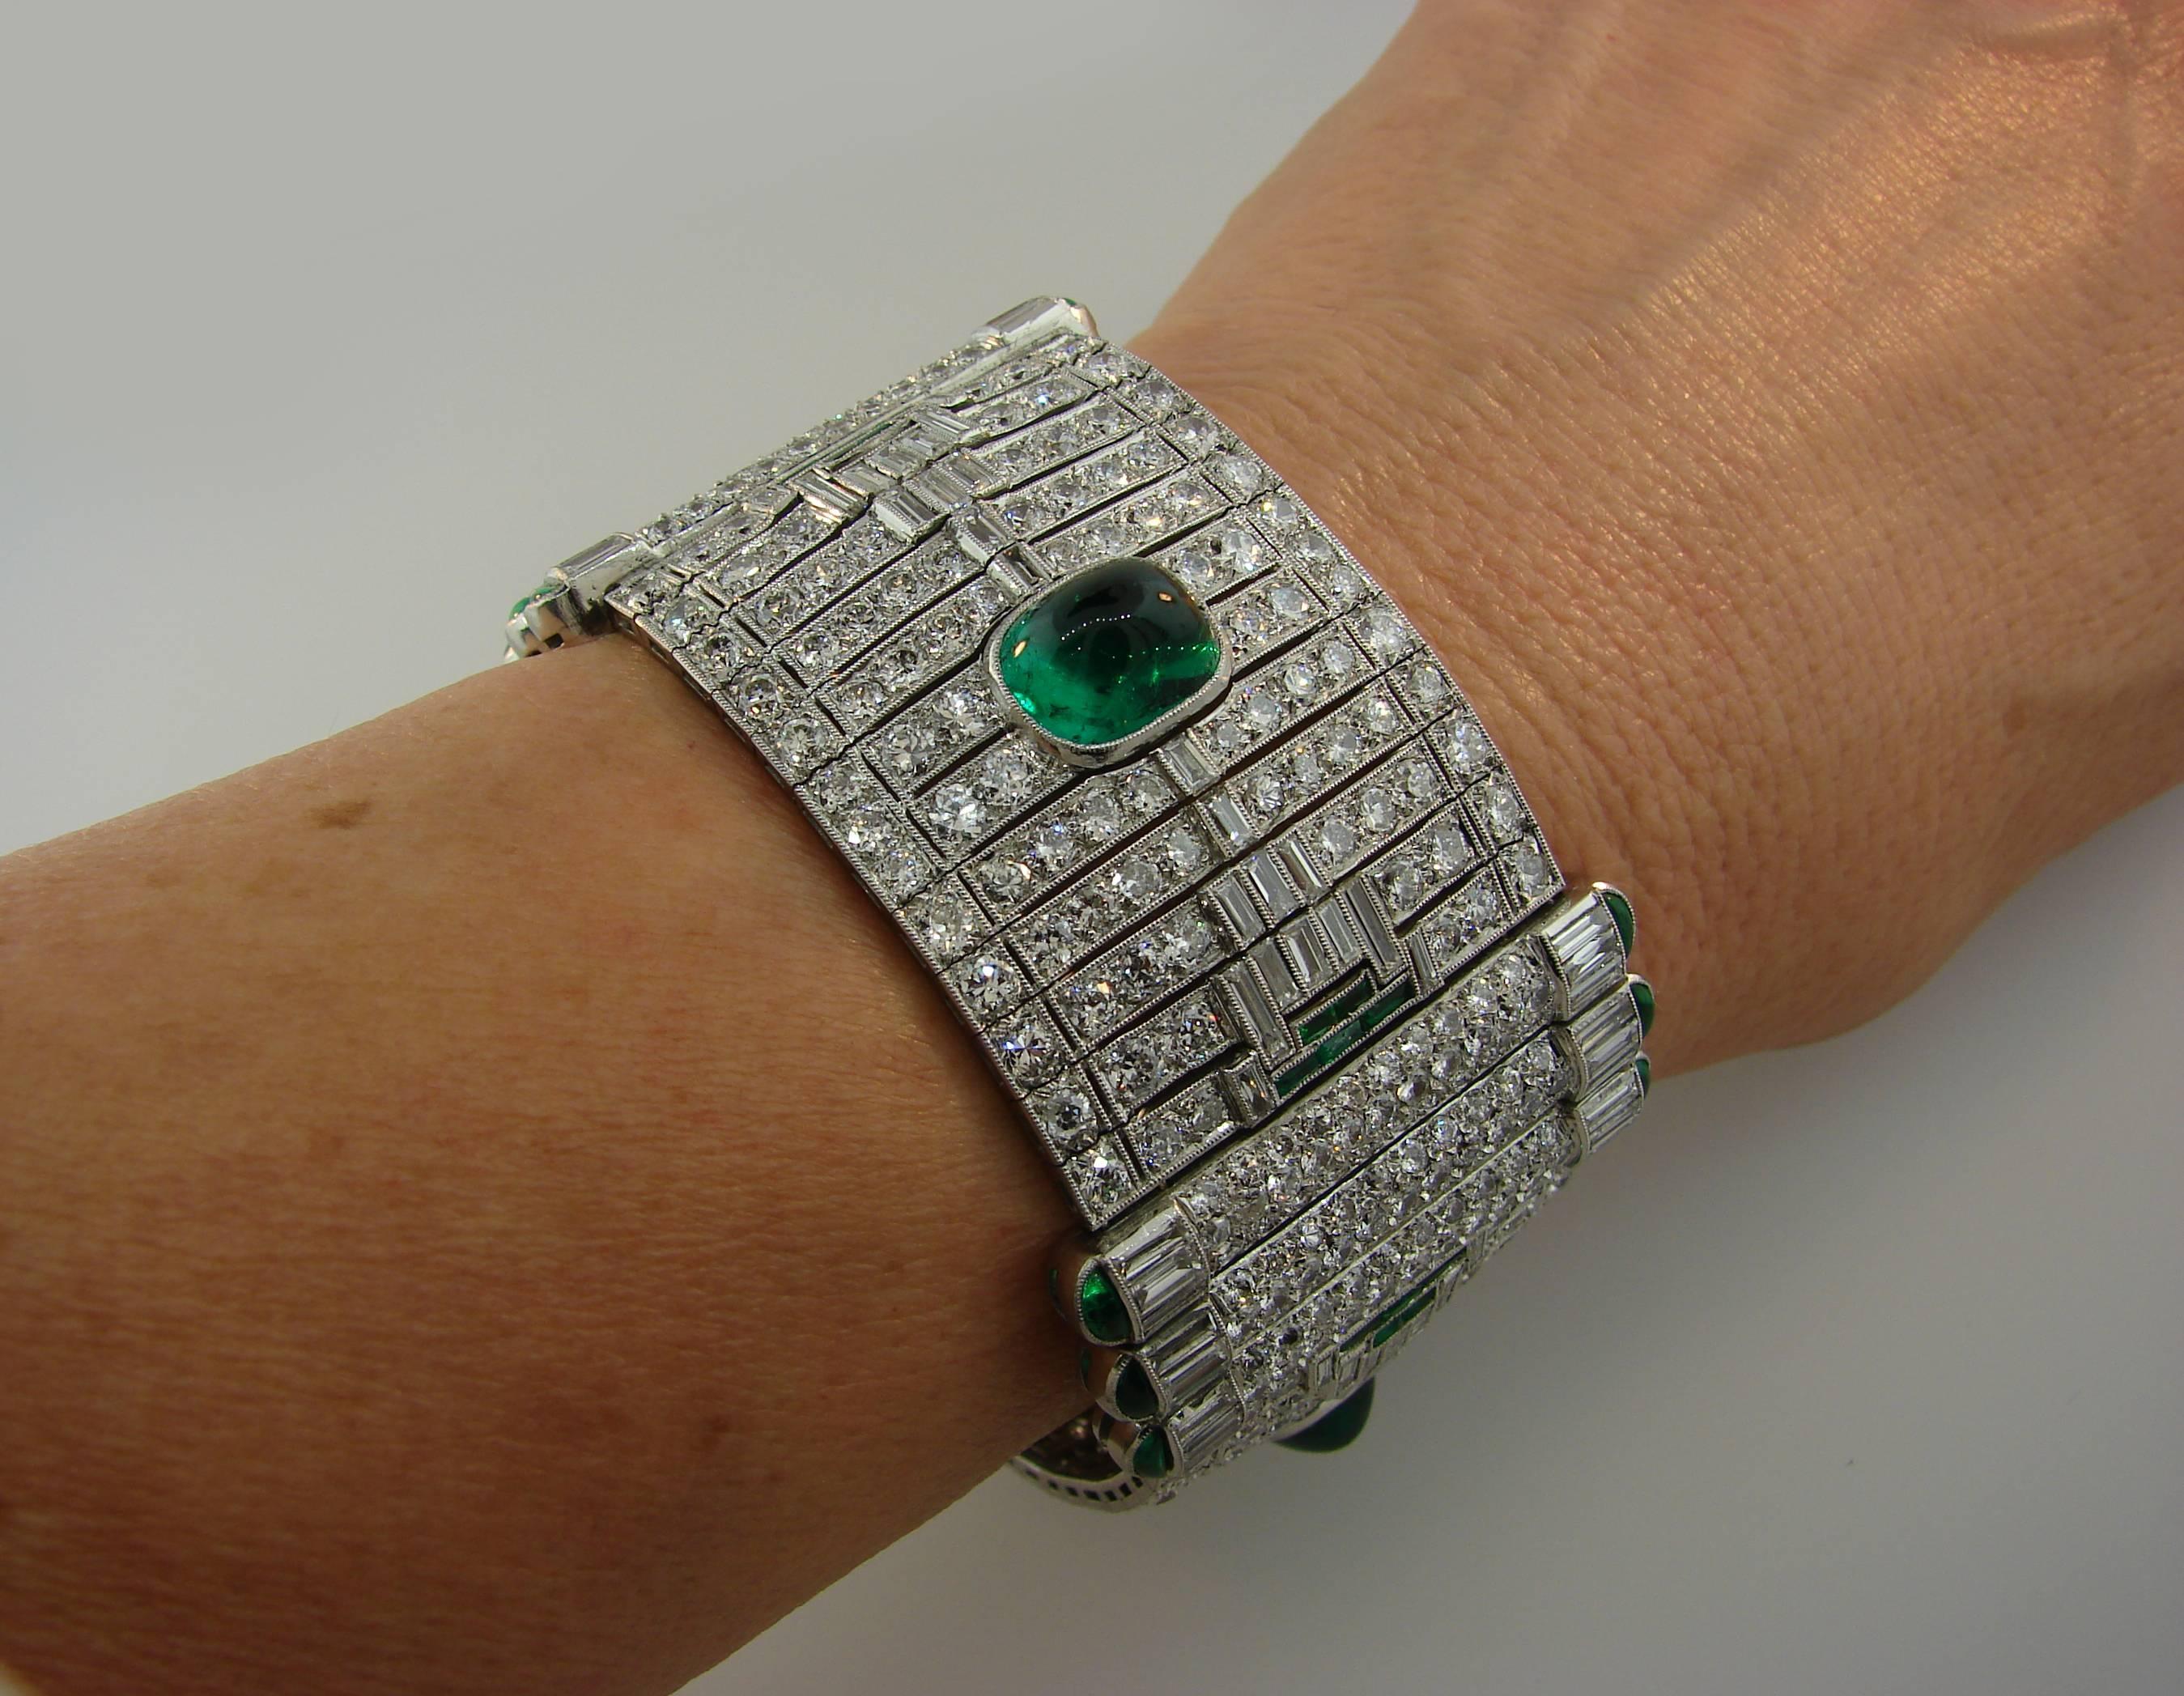 Stunning Art Deco bracelet created by Levy-Wander in the 1930's. It is made of platinum, features three cabochon emeralds and encrusted with round and baguette cut diamonds. The three larger emeralds come with a Gemstone Report from American